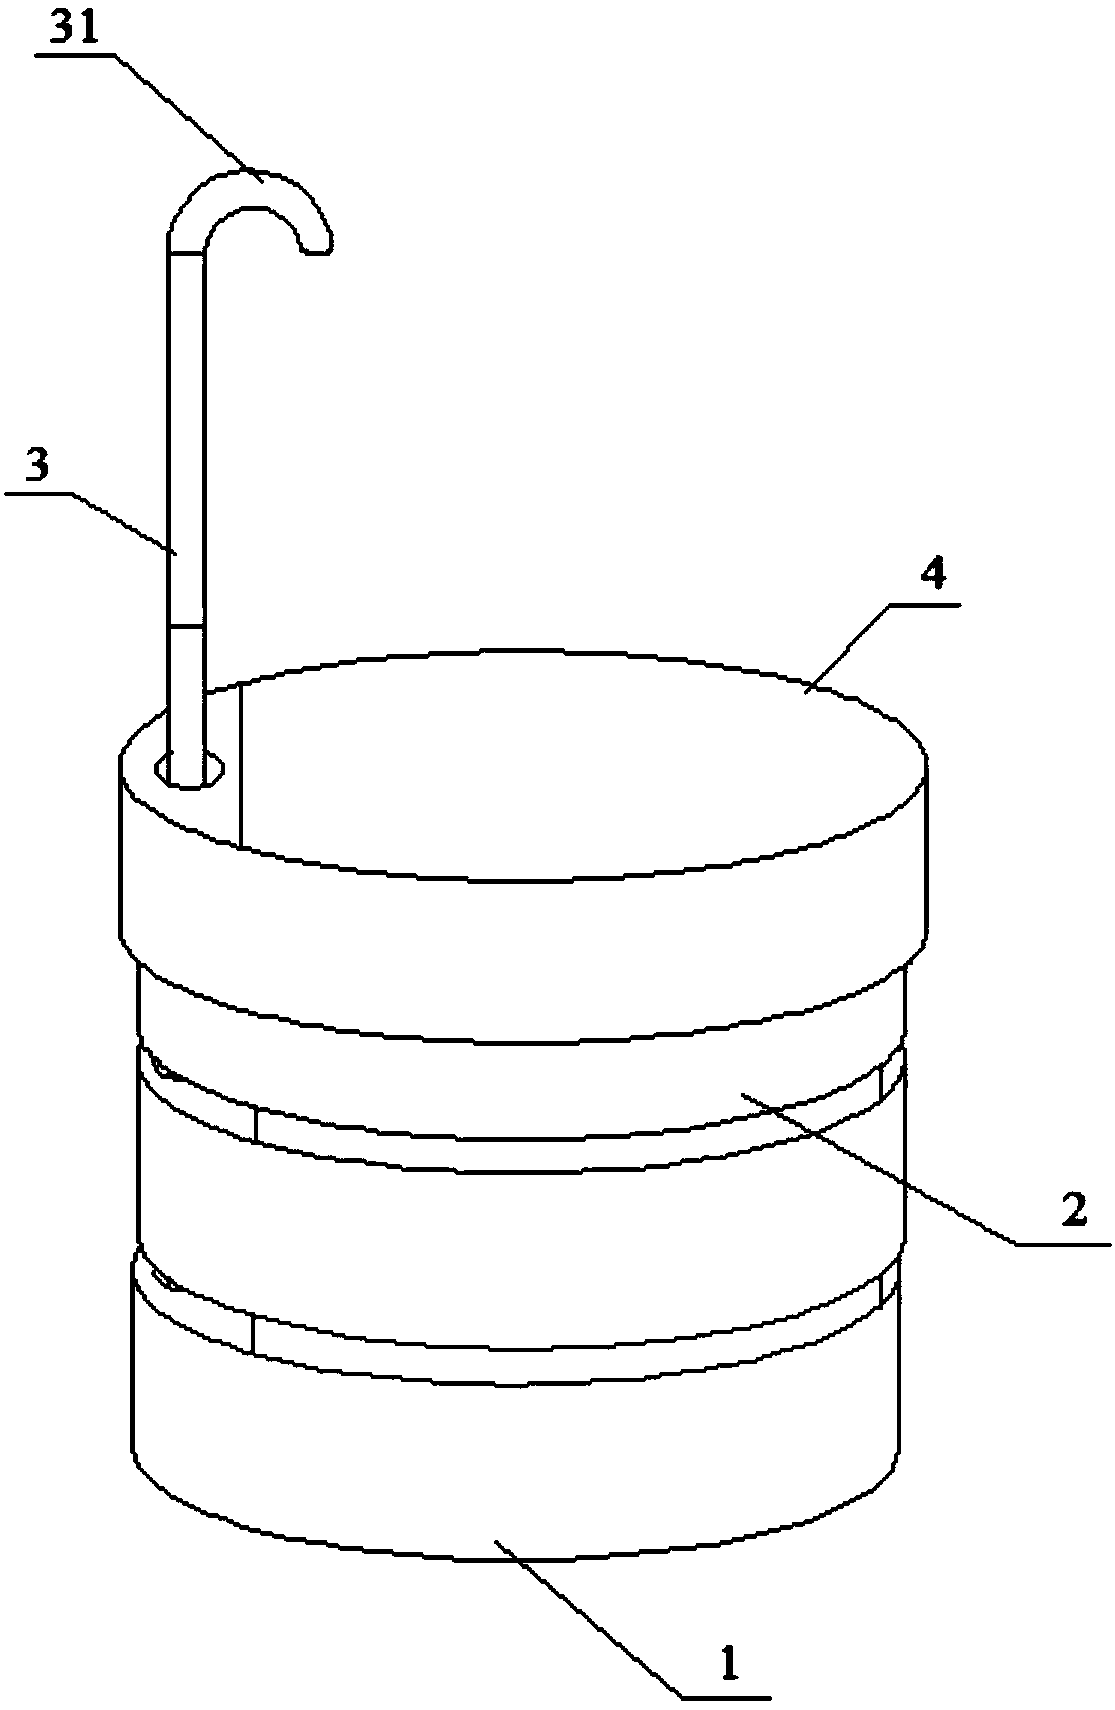 Culture device for accelerating growth rate of cells